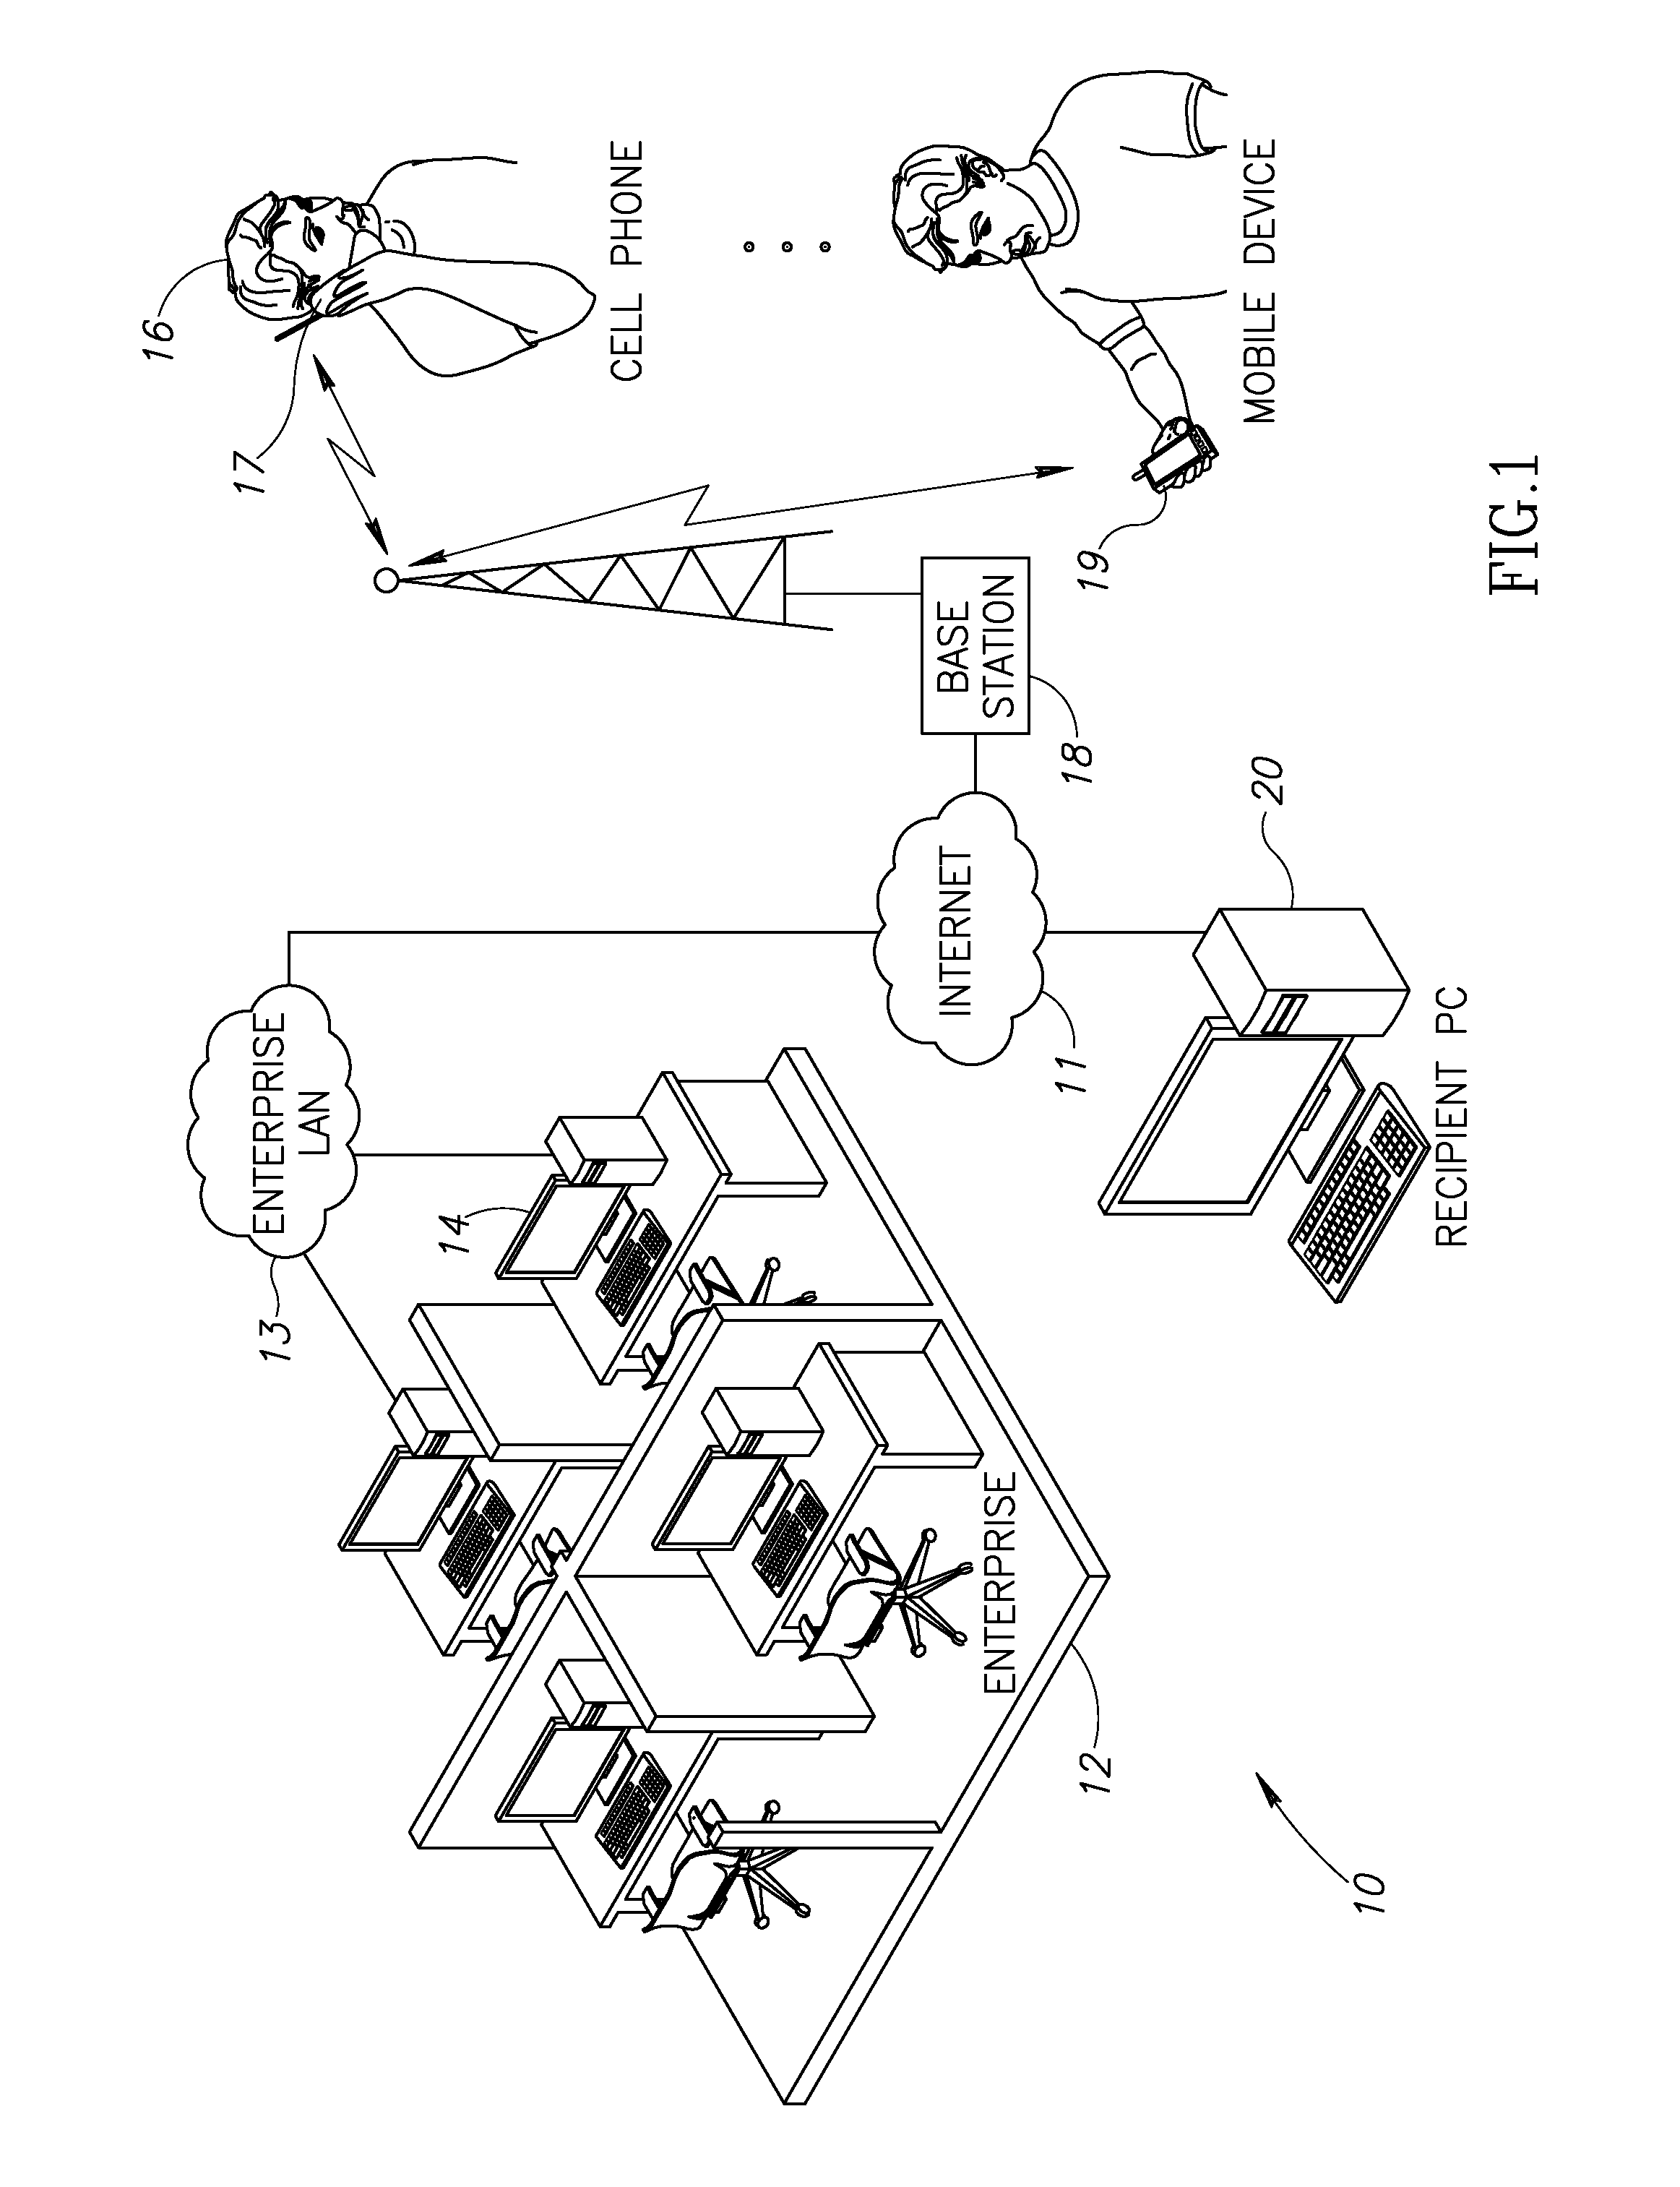 System and method of mobile to desktop document interaction using really simple syndication